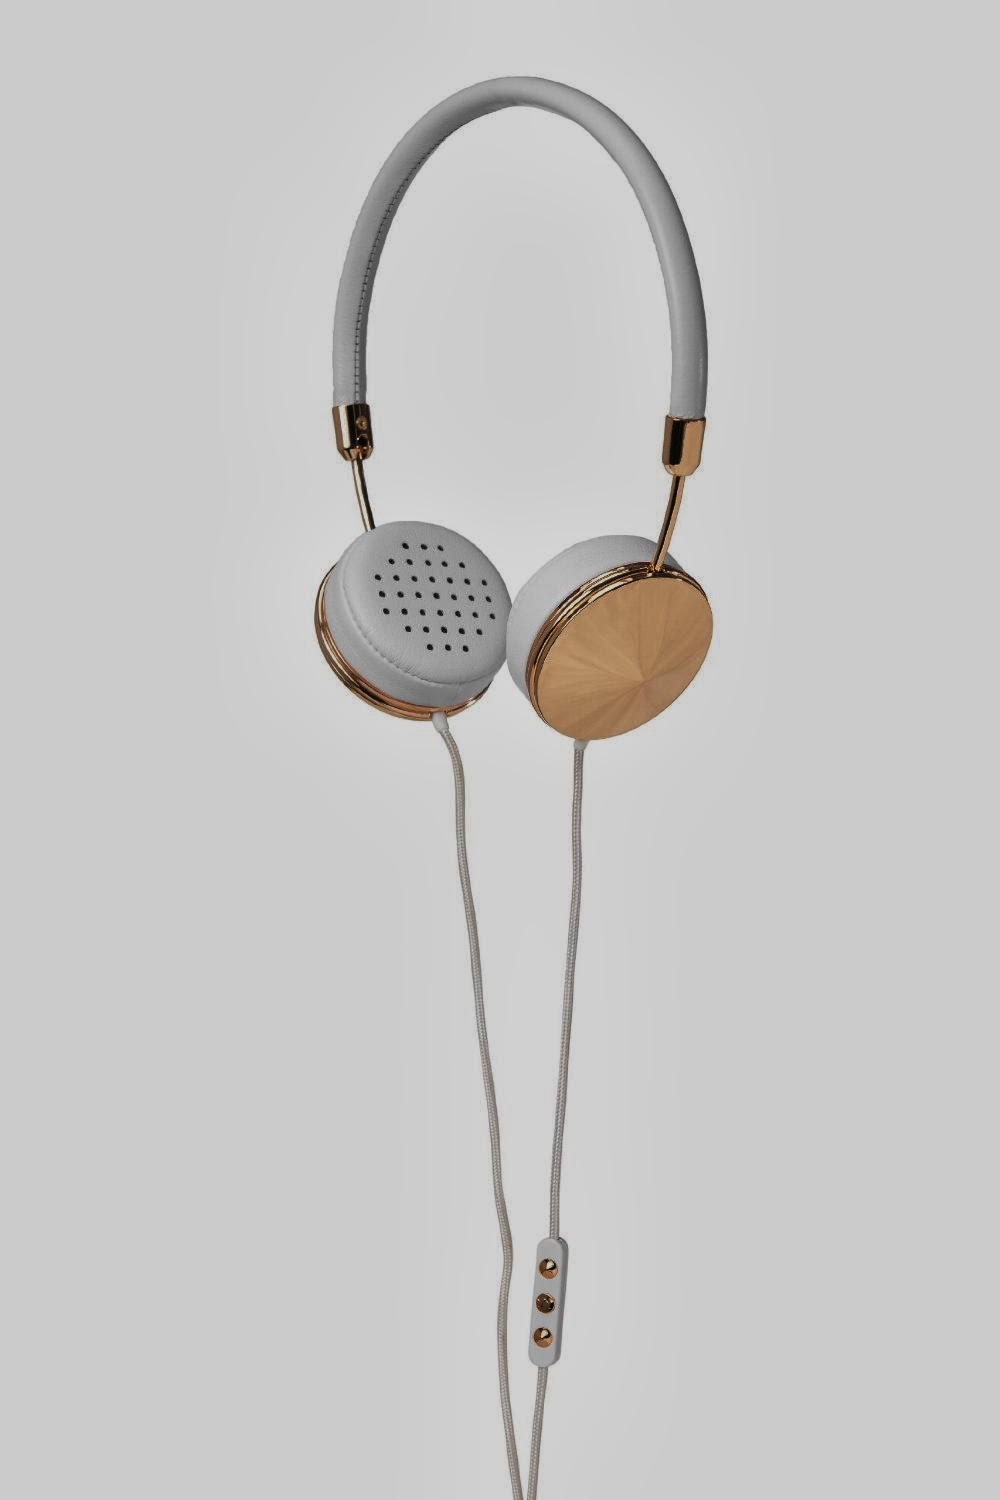 Frends Layla Headphones Color: Gold/White